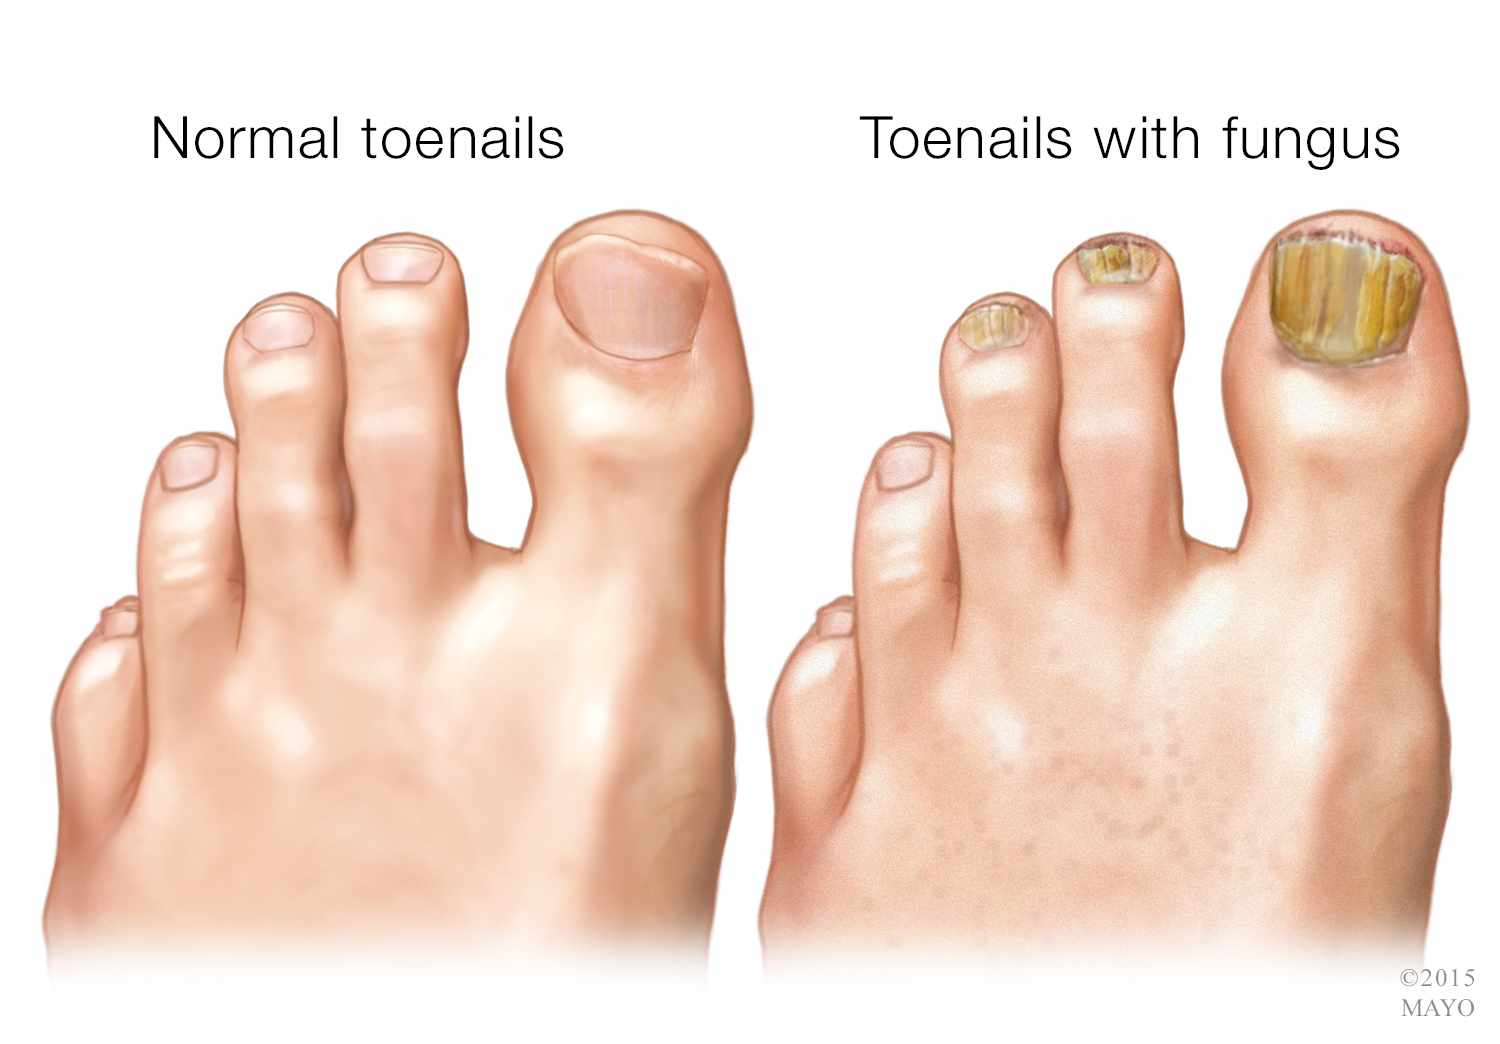 Laser Treatments & Therapy for Fungal Nails in Perth